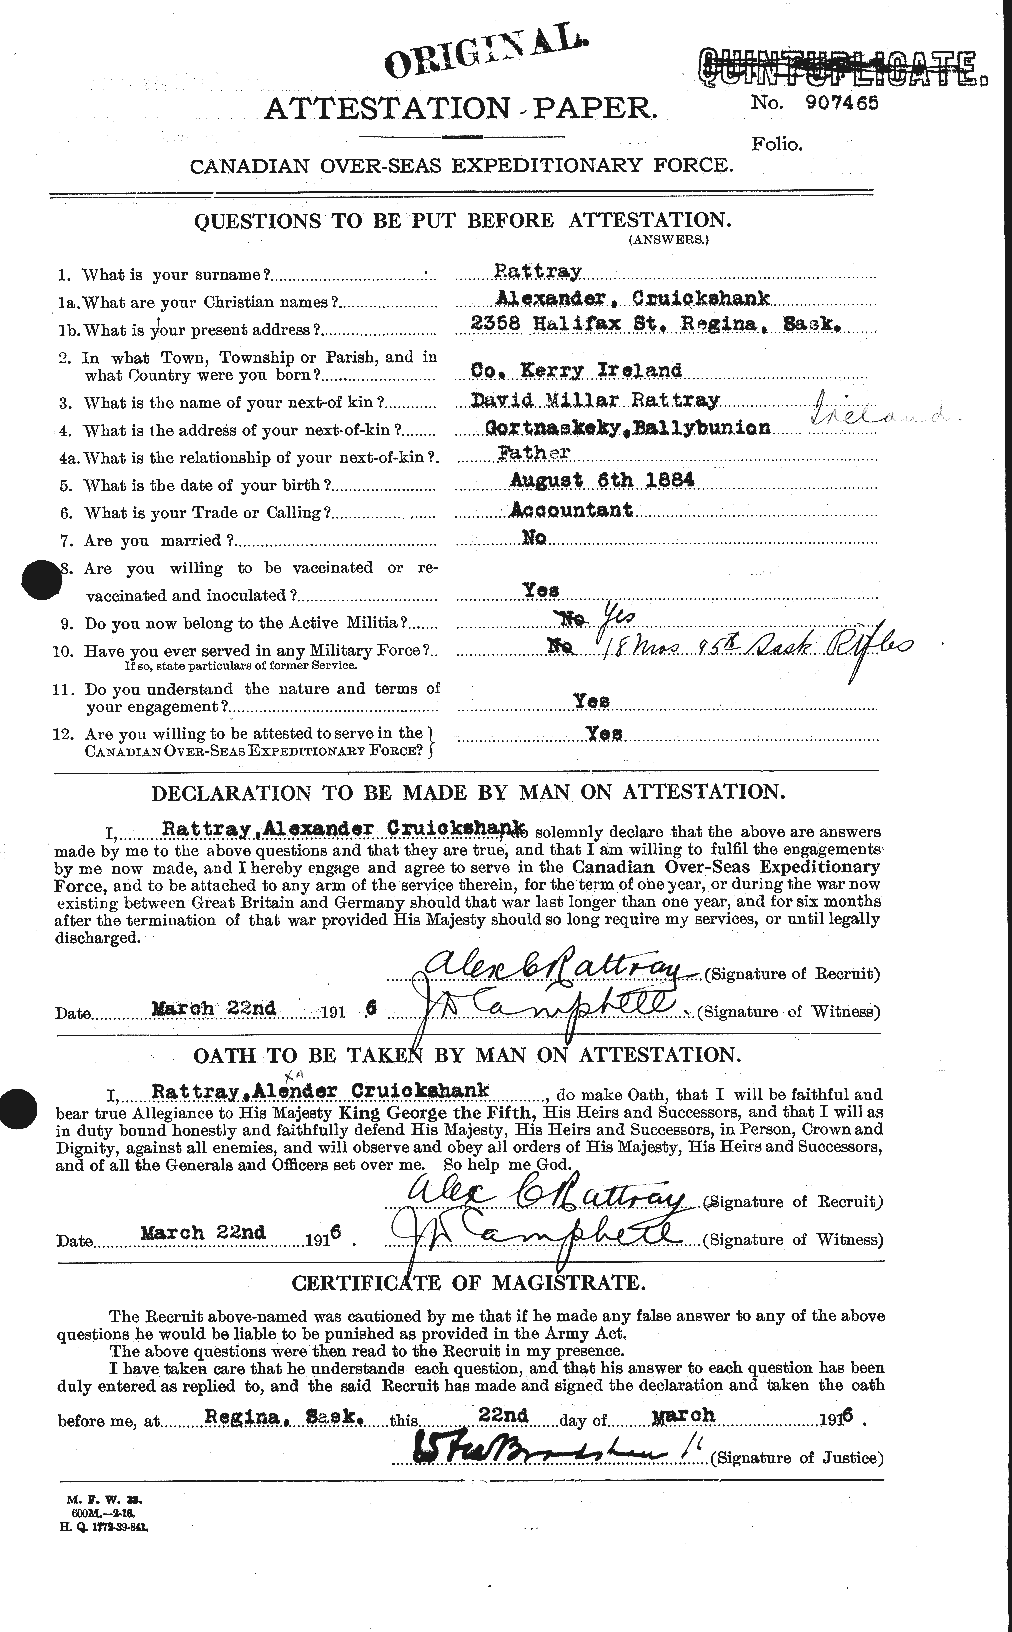 Personnel Records of the First World War - CEF 595688a